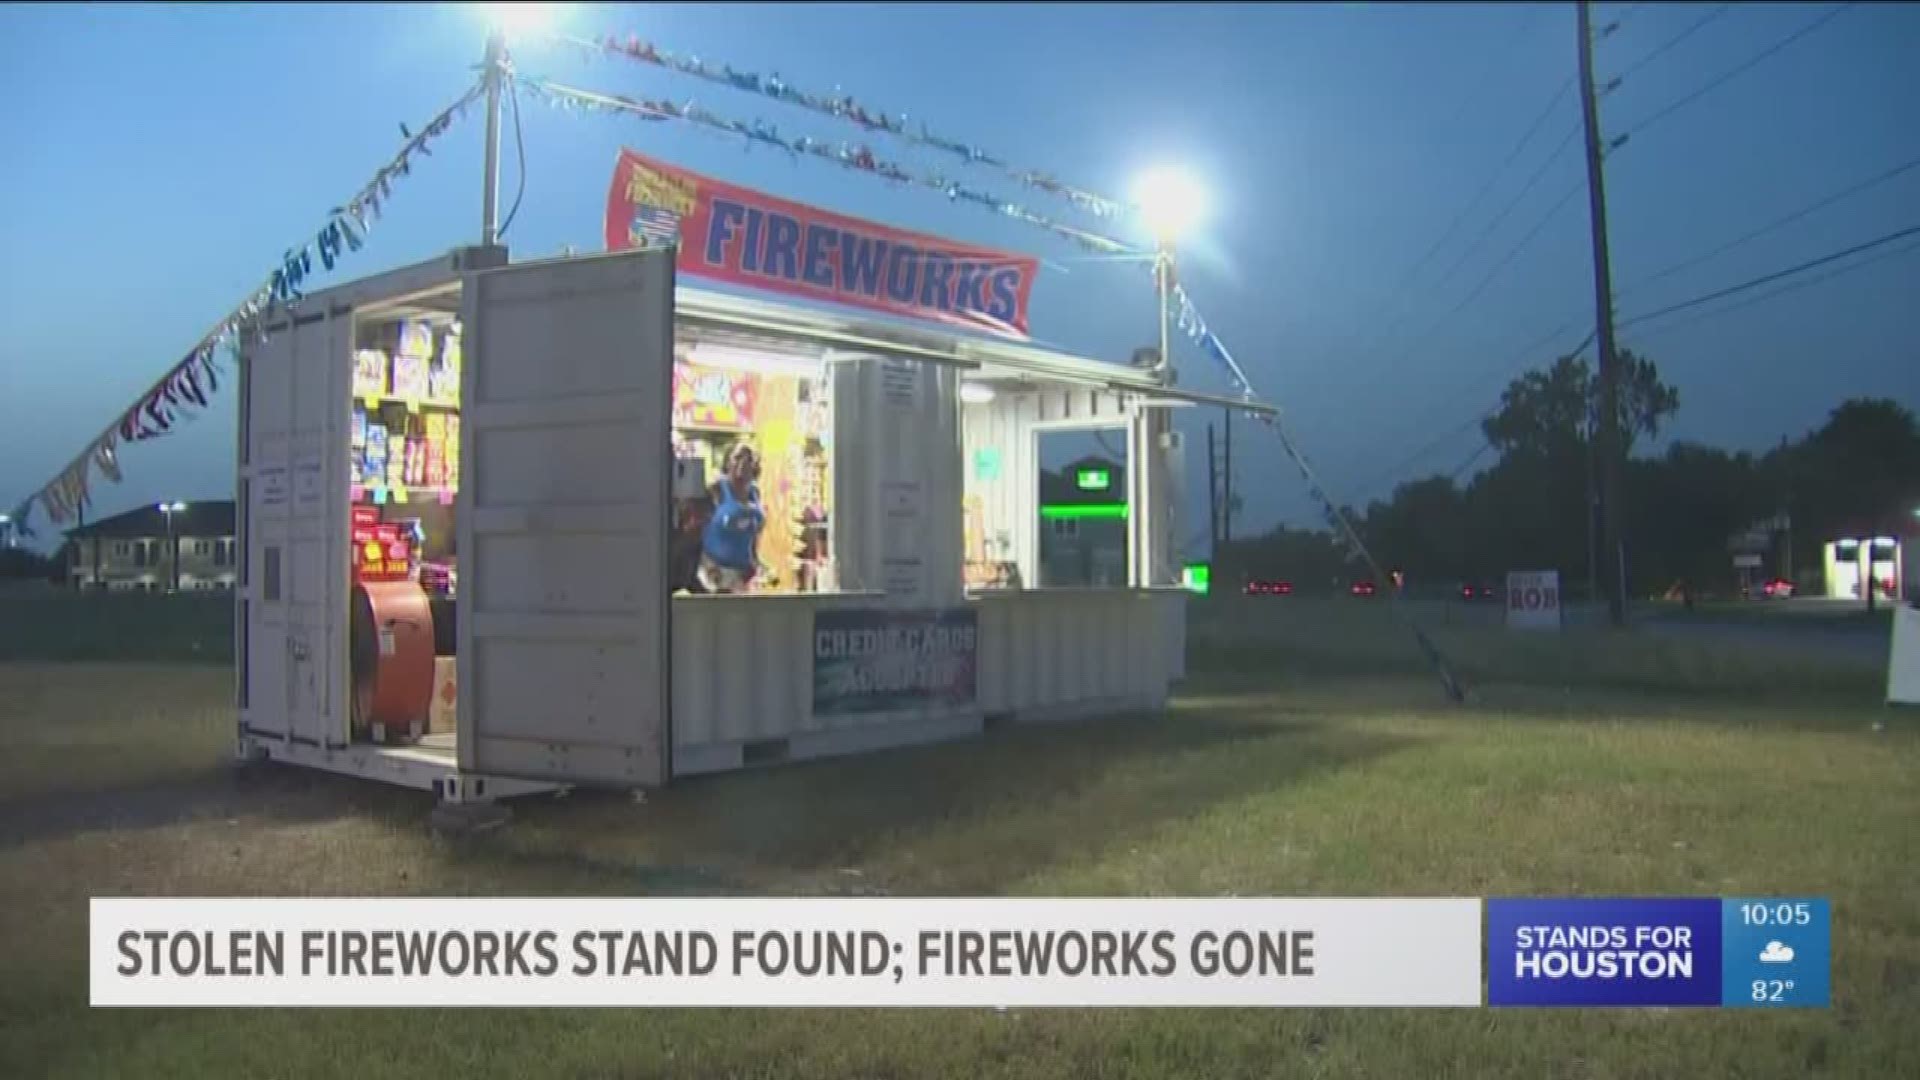 The container has been found but the fireworks are gone.